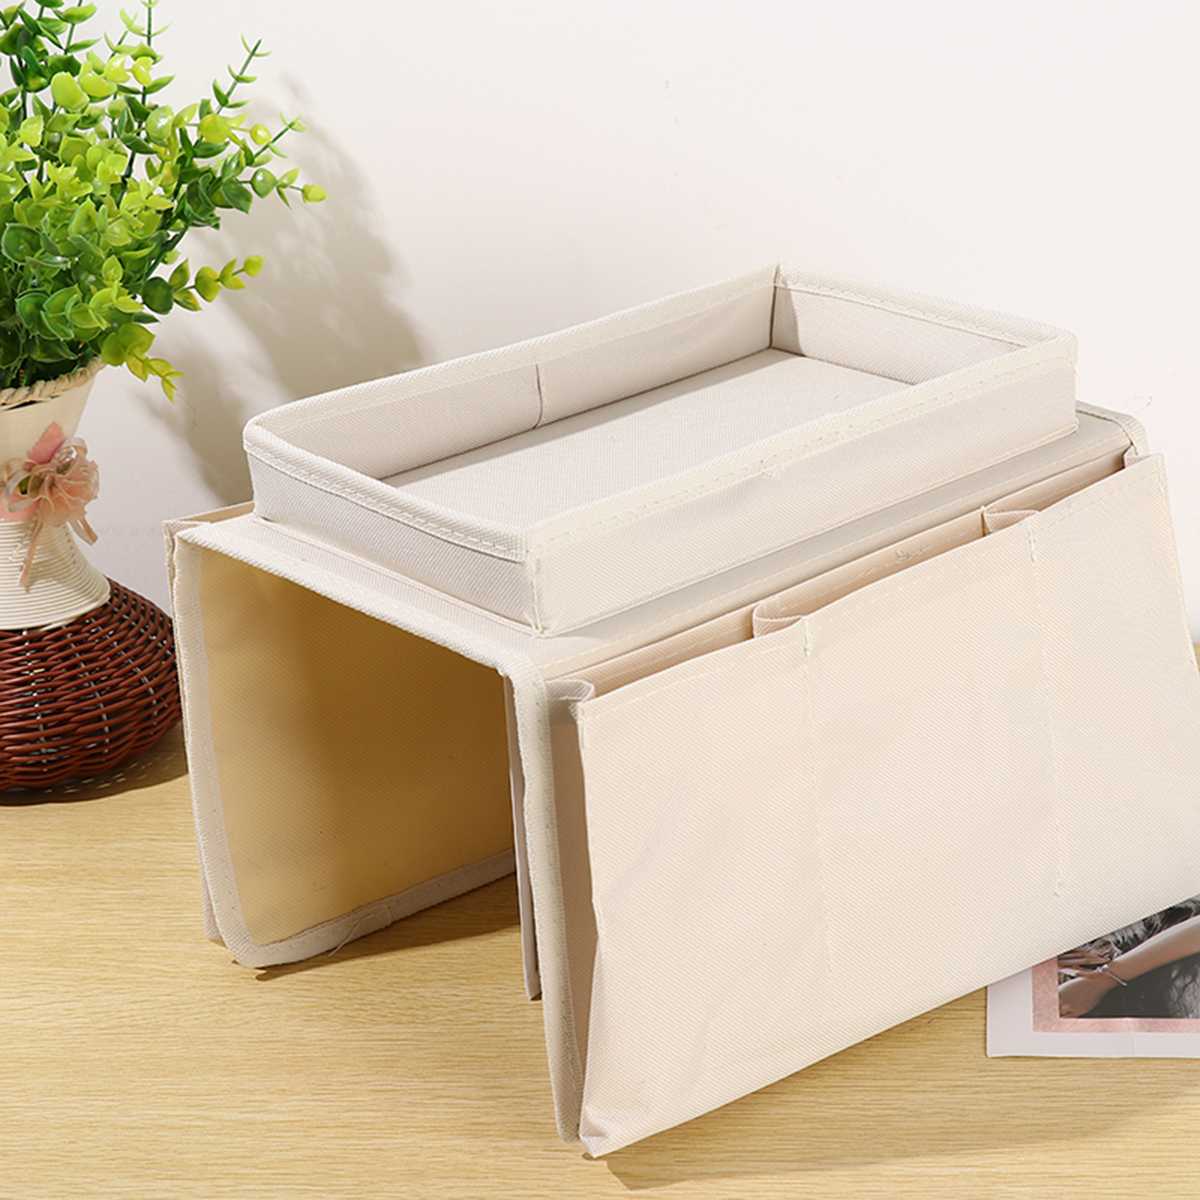 

Storage Bag Sofa TV Remote Control Handset Holder Organizer Caddy For Fits Over Chairs Sofas Armchairs With Wide Arm, Coffee